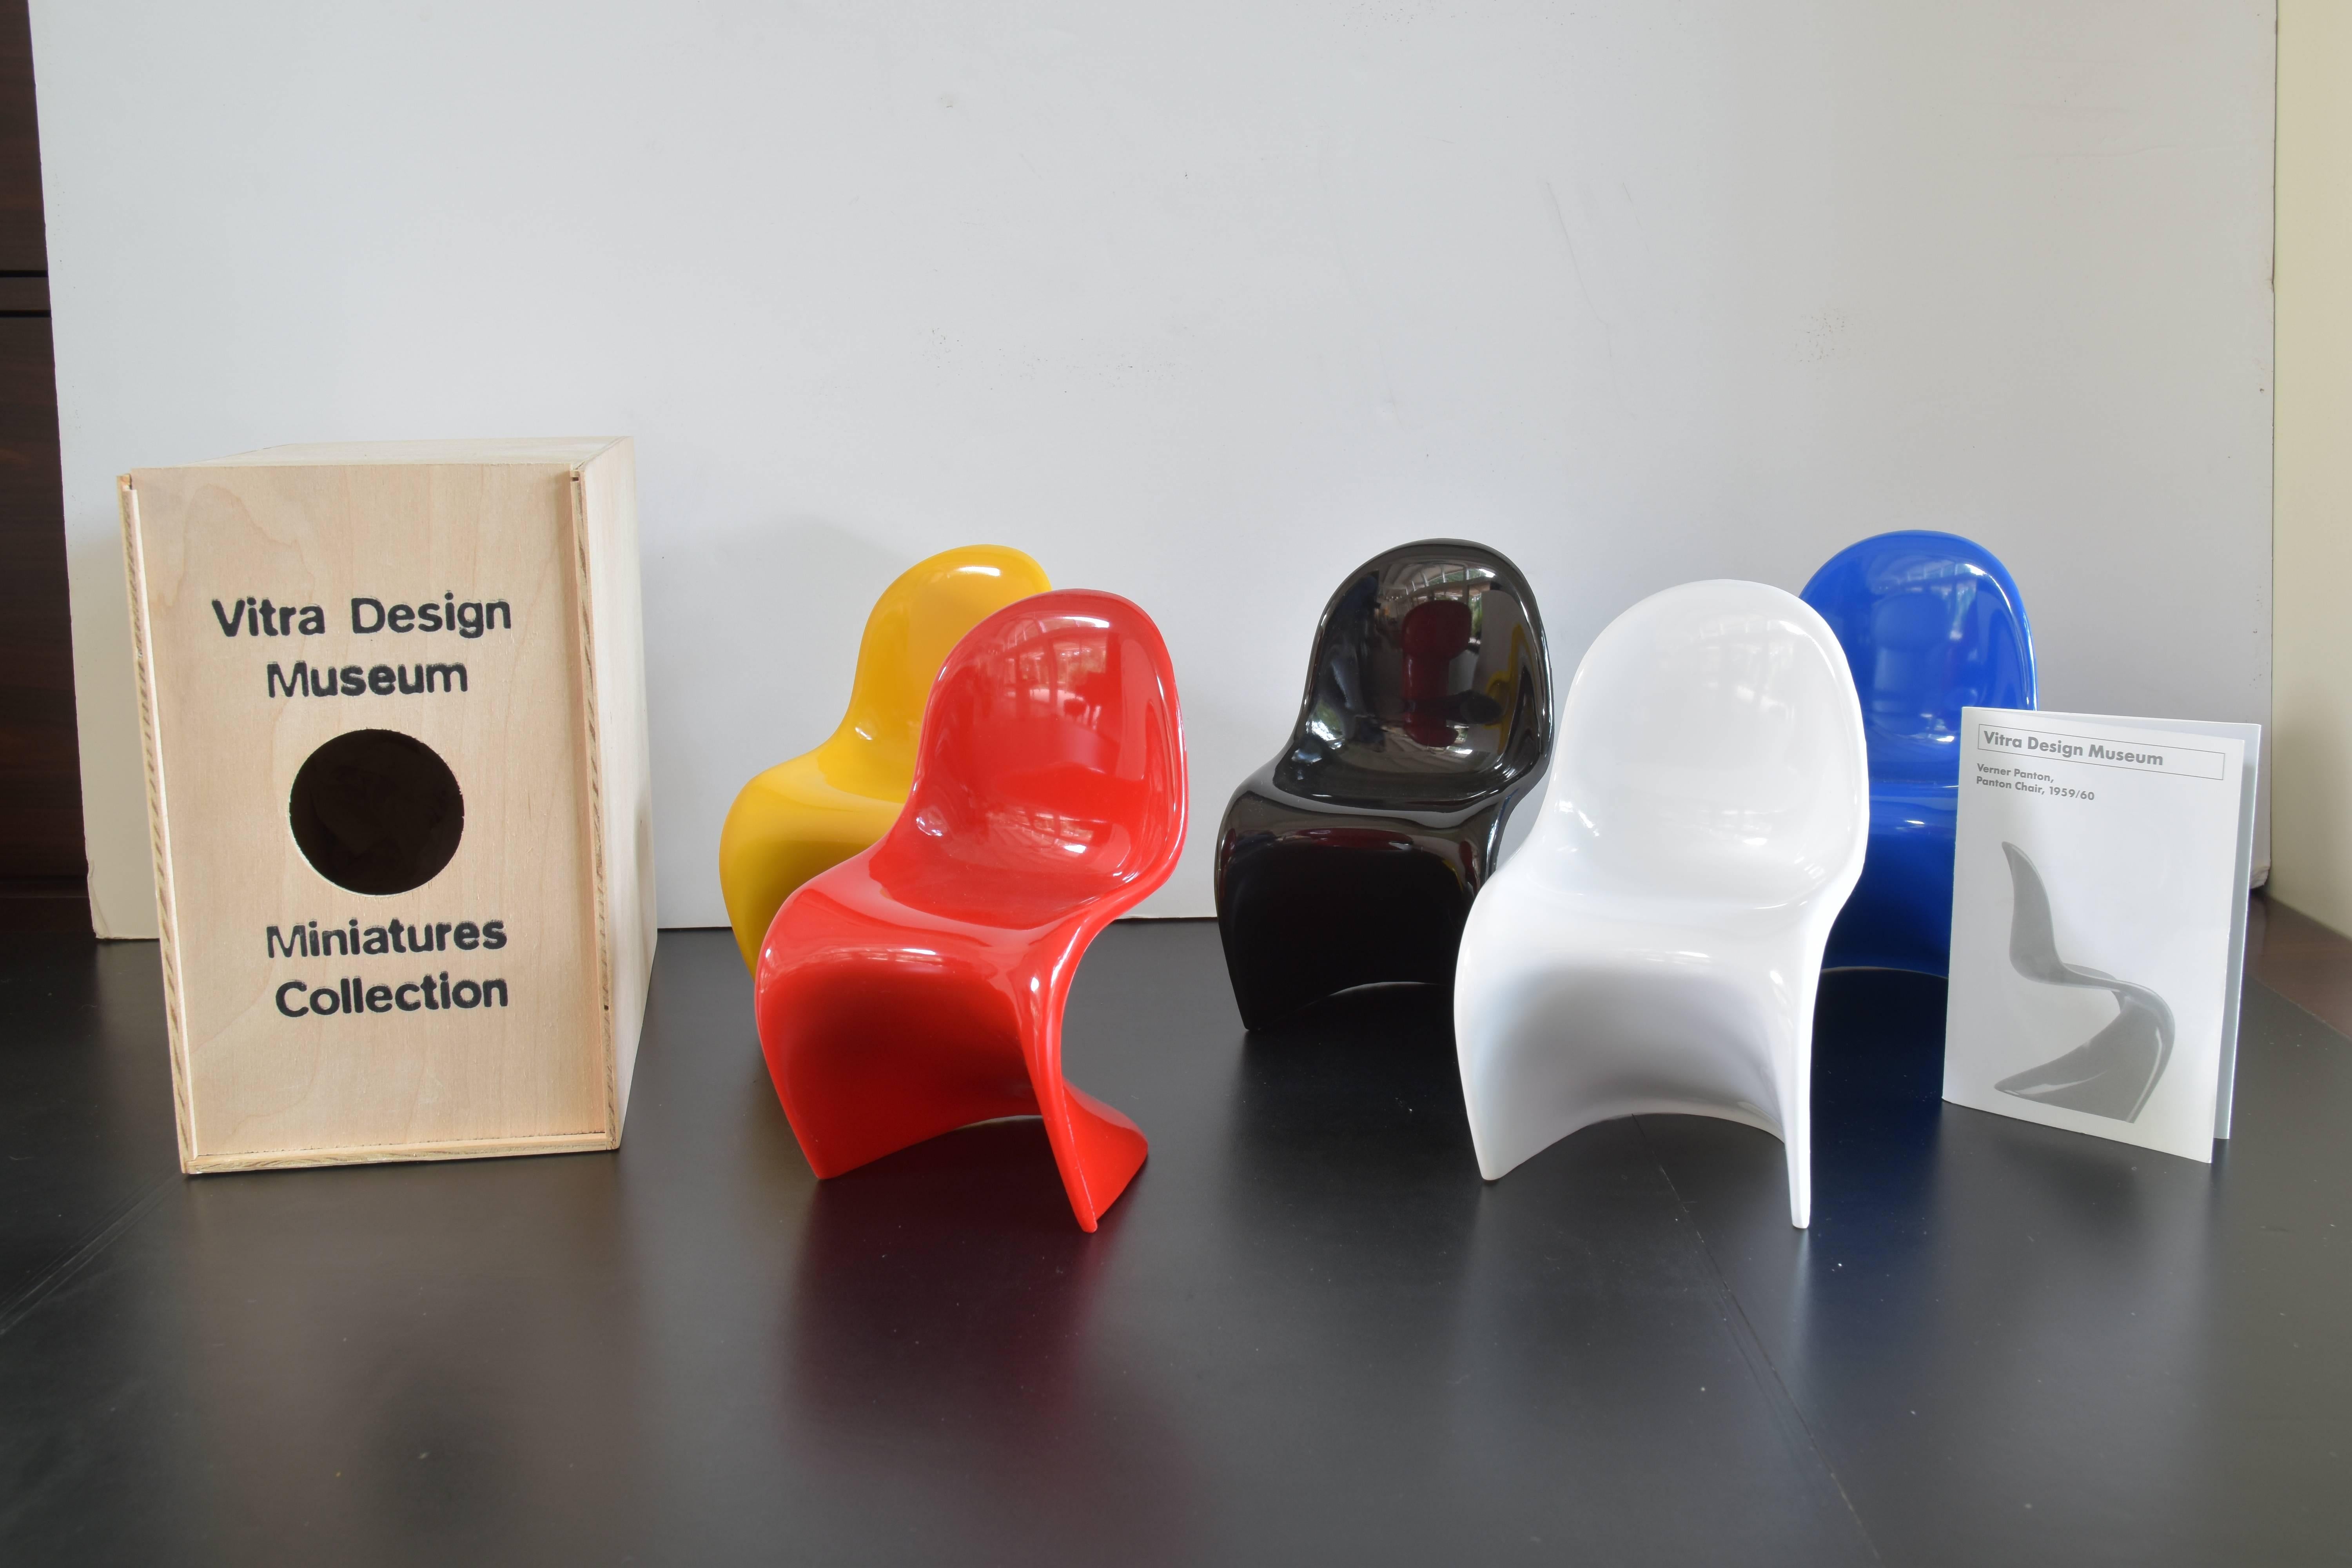 Collection of five Verner Panton miniature chairs in red, white, black, yellow and blue.

These chairs are modeled after the originals by designed by Verner Panton in 1959-1960.

These miniatures are after the original model from the first